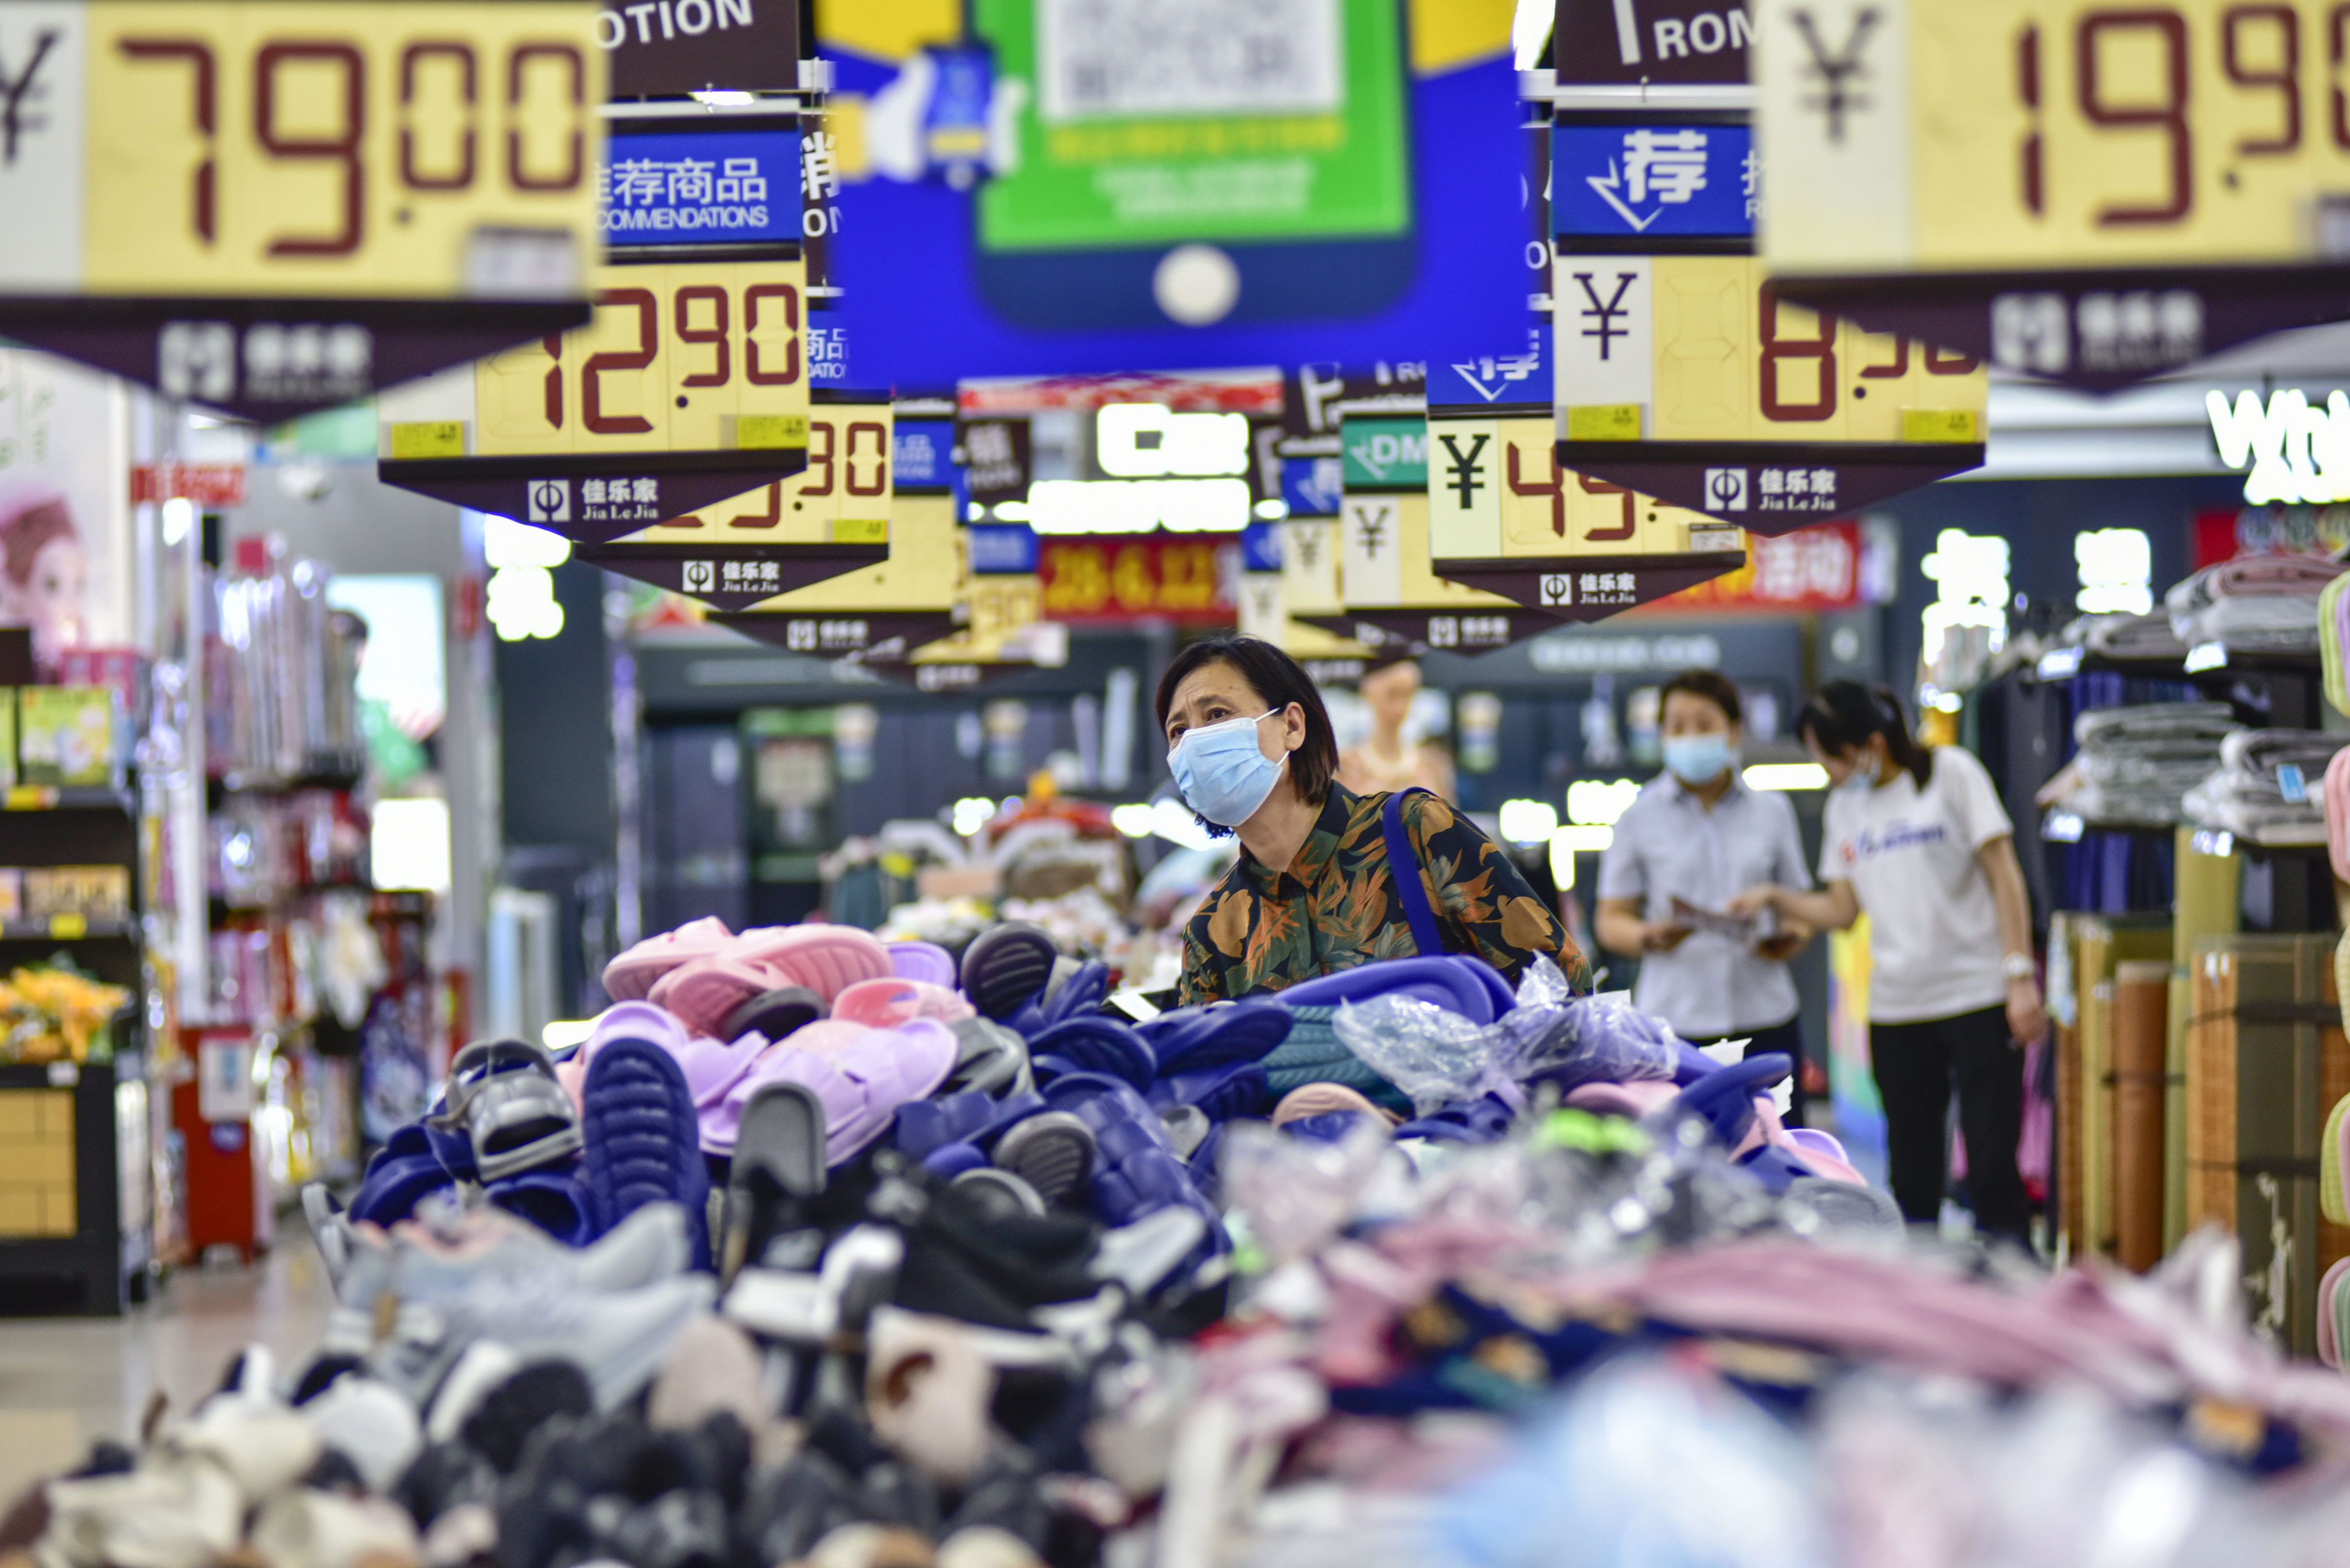 Customers shop at a supermarket in Qingzhou, east China’s Shandong province. Chinese consumers have become cautious in their spending, a study showed. Photo: Xinhua